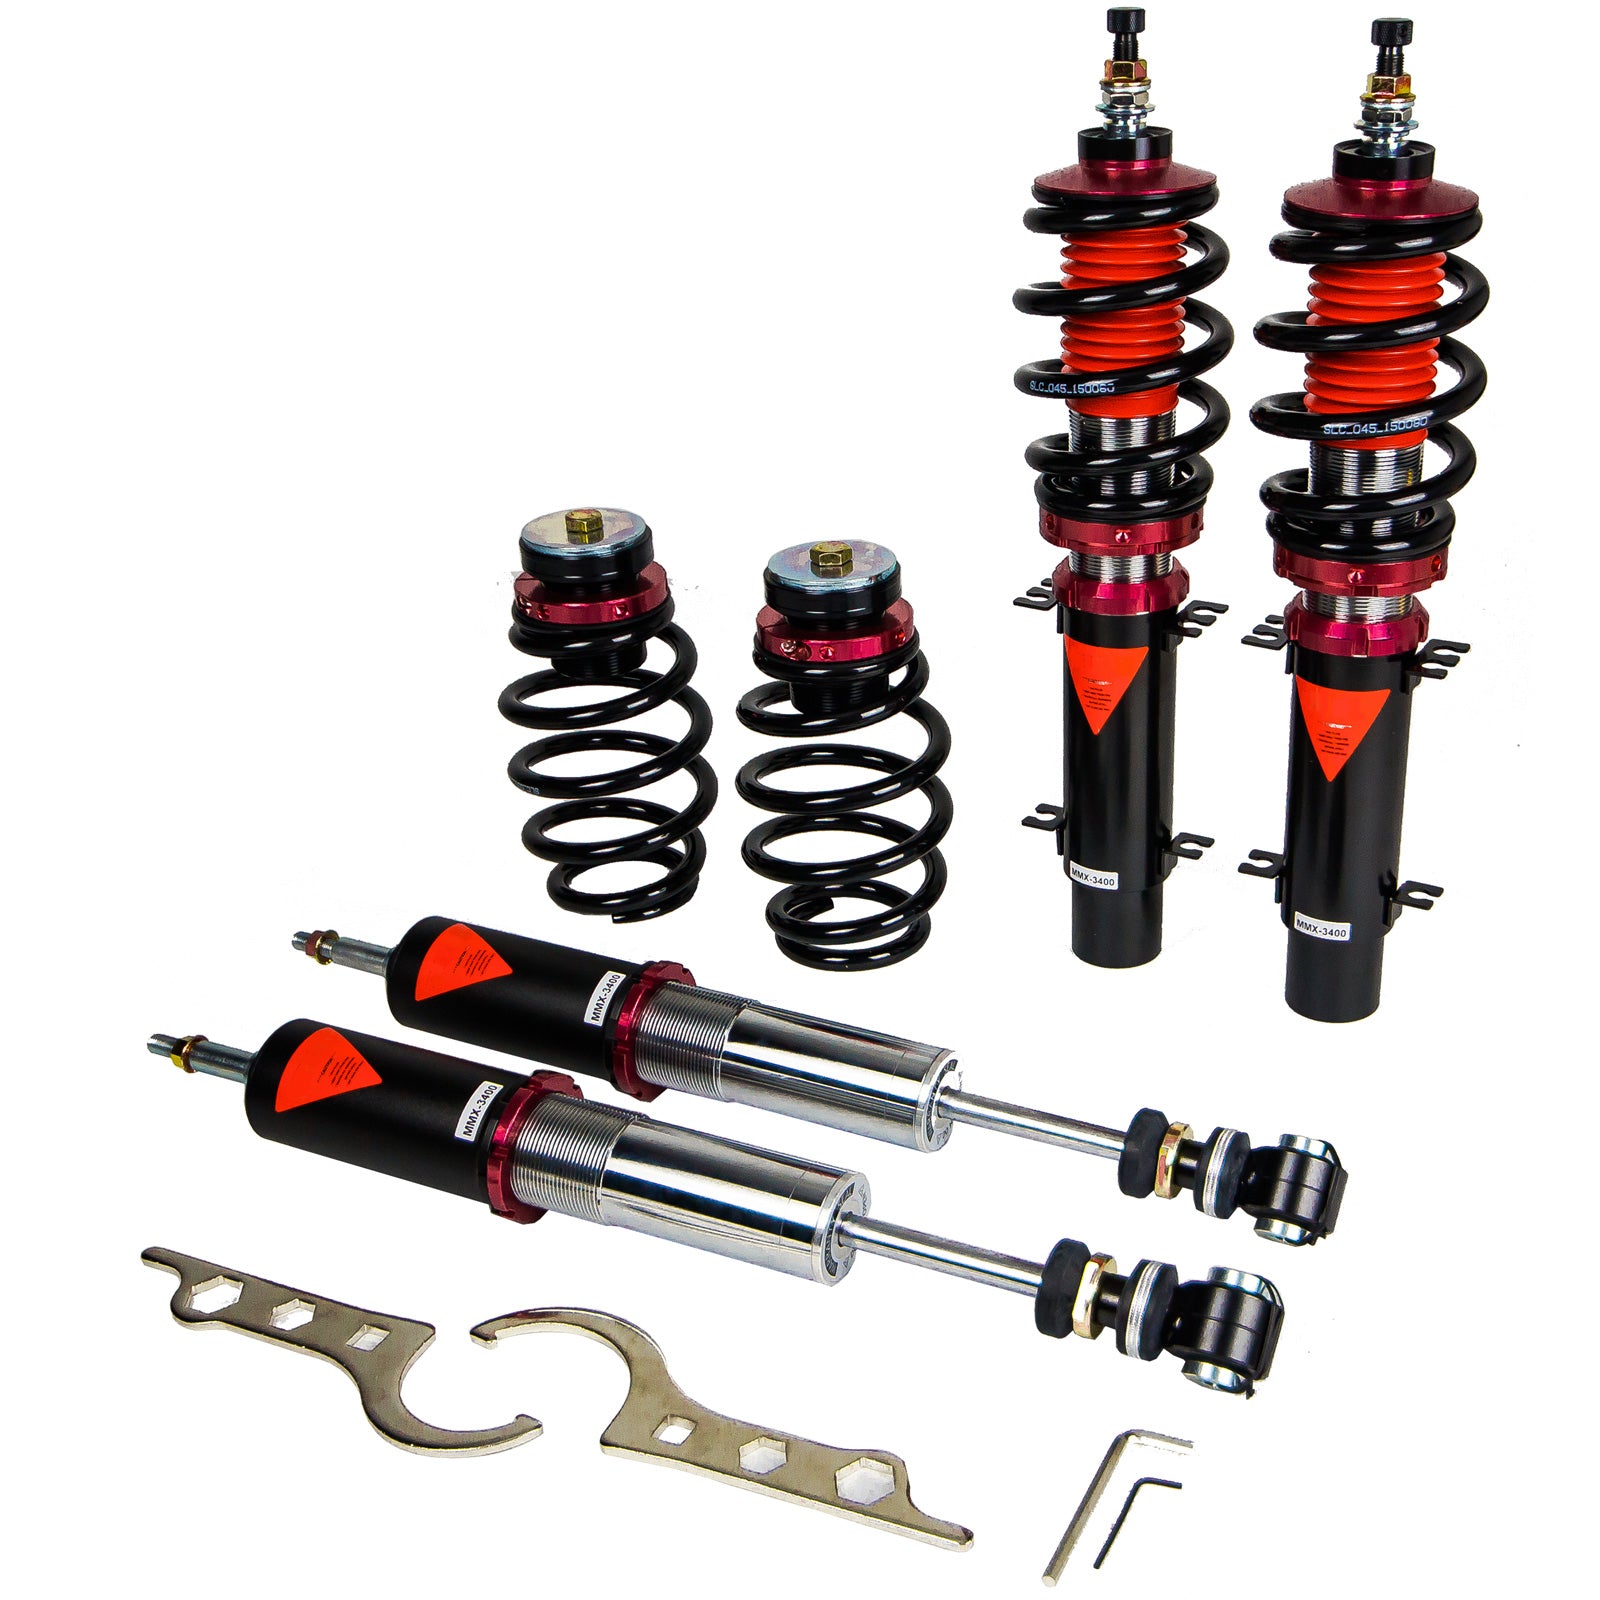 MMX3400-A MAXX Coilovers Lowering Kit, Fully Adjustable, Ride Height, 40 Clicks Rebound Settings, Volkswagen Golf(MK4) 1999-06 FWD ONLY